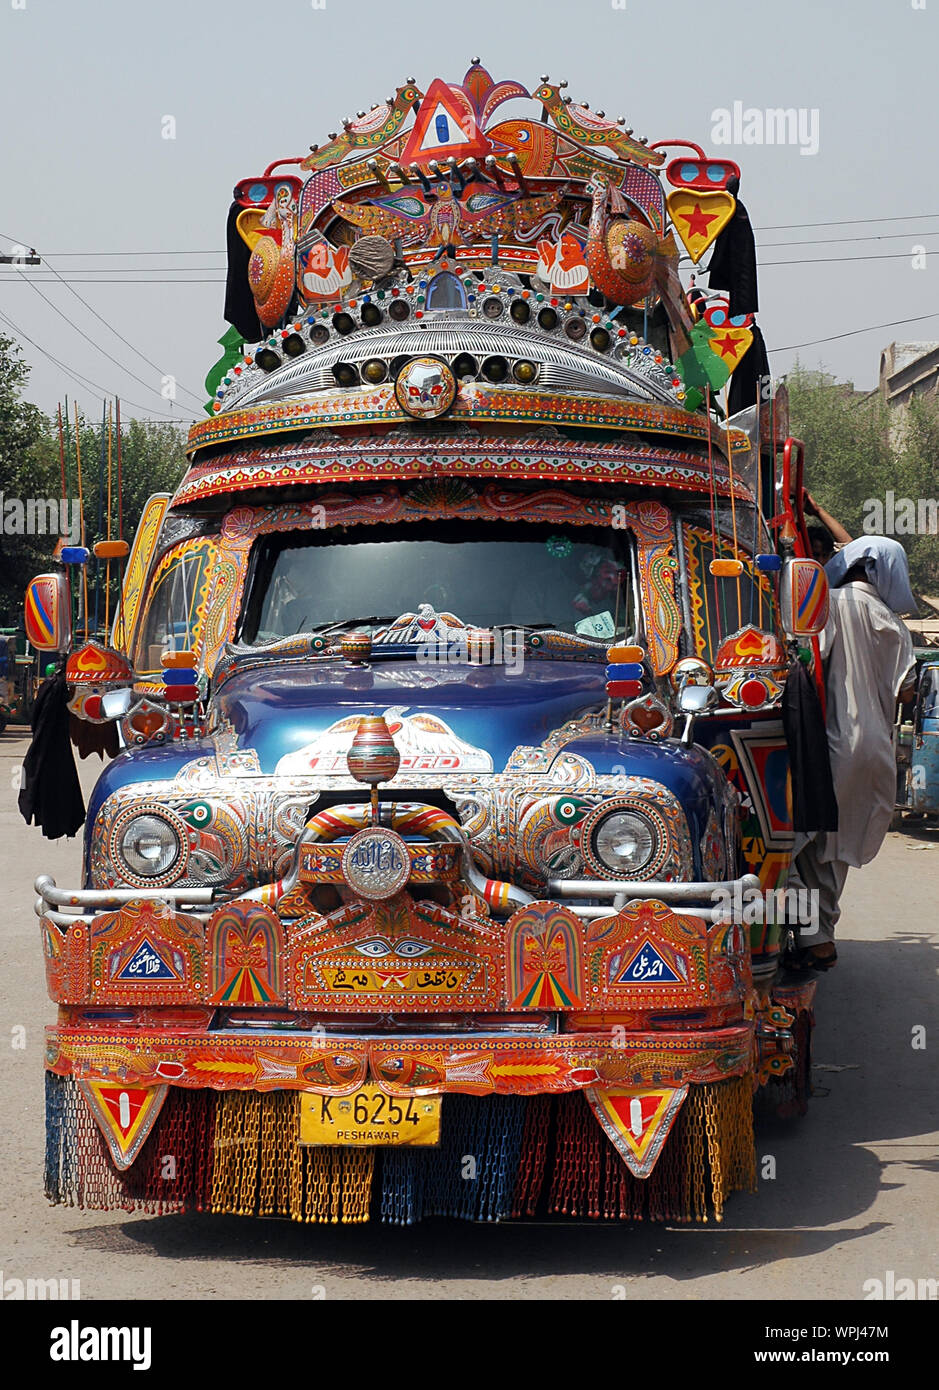 Colorful Bedford truck used as local transportation in Peshawar, Pakistan. The truck is colourful and used as a local bus in Peshawar, Pakistan. Stock Photo